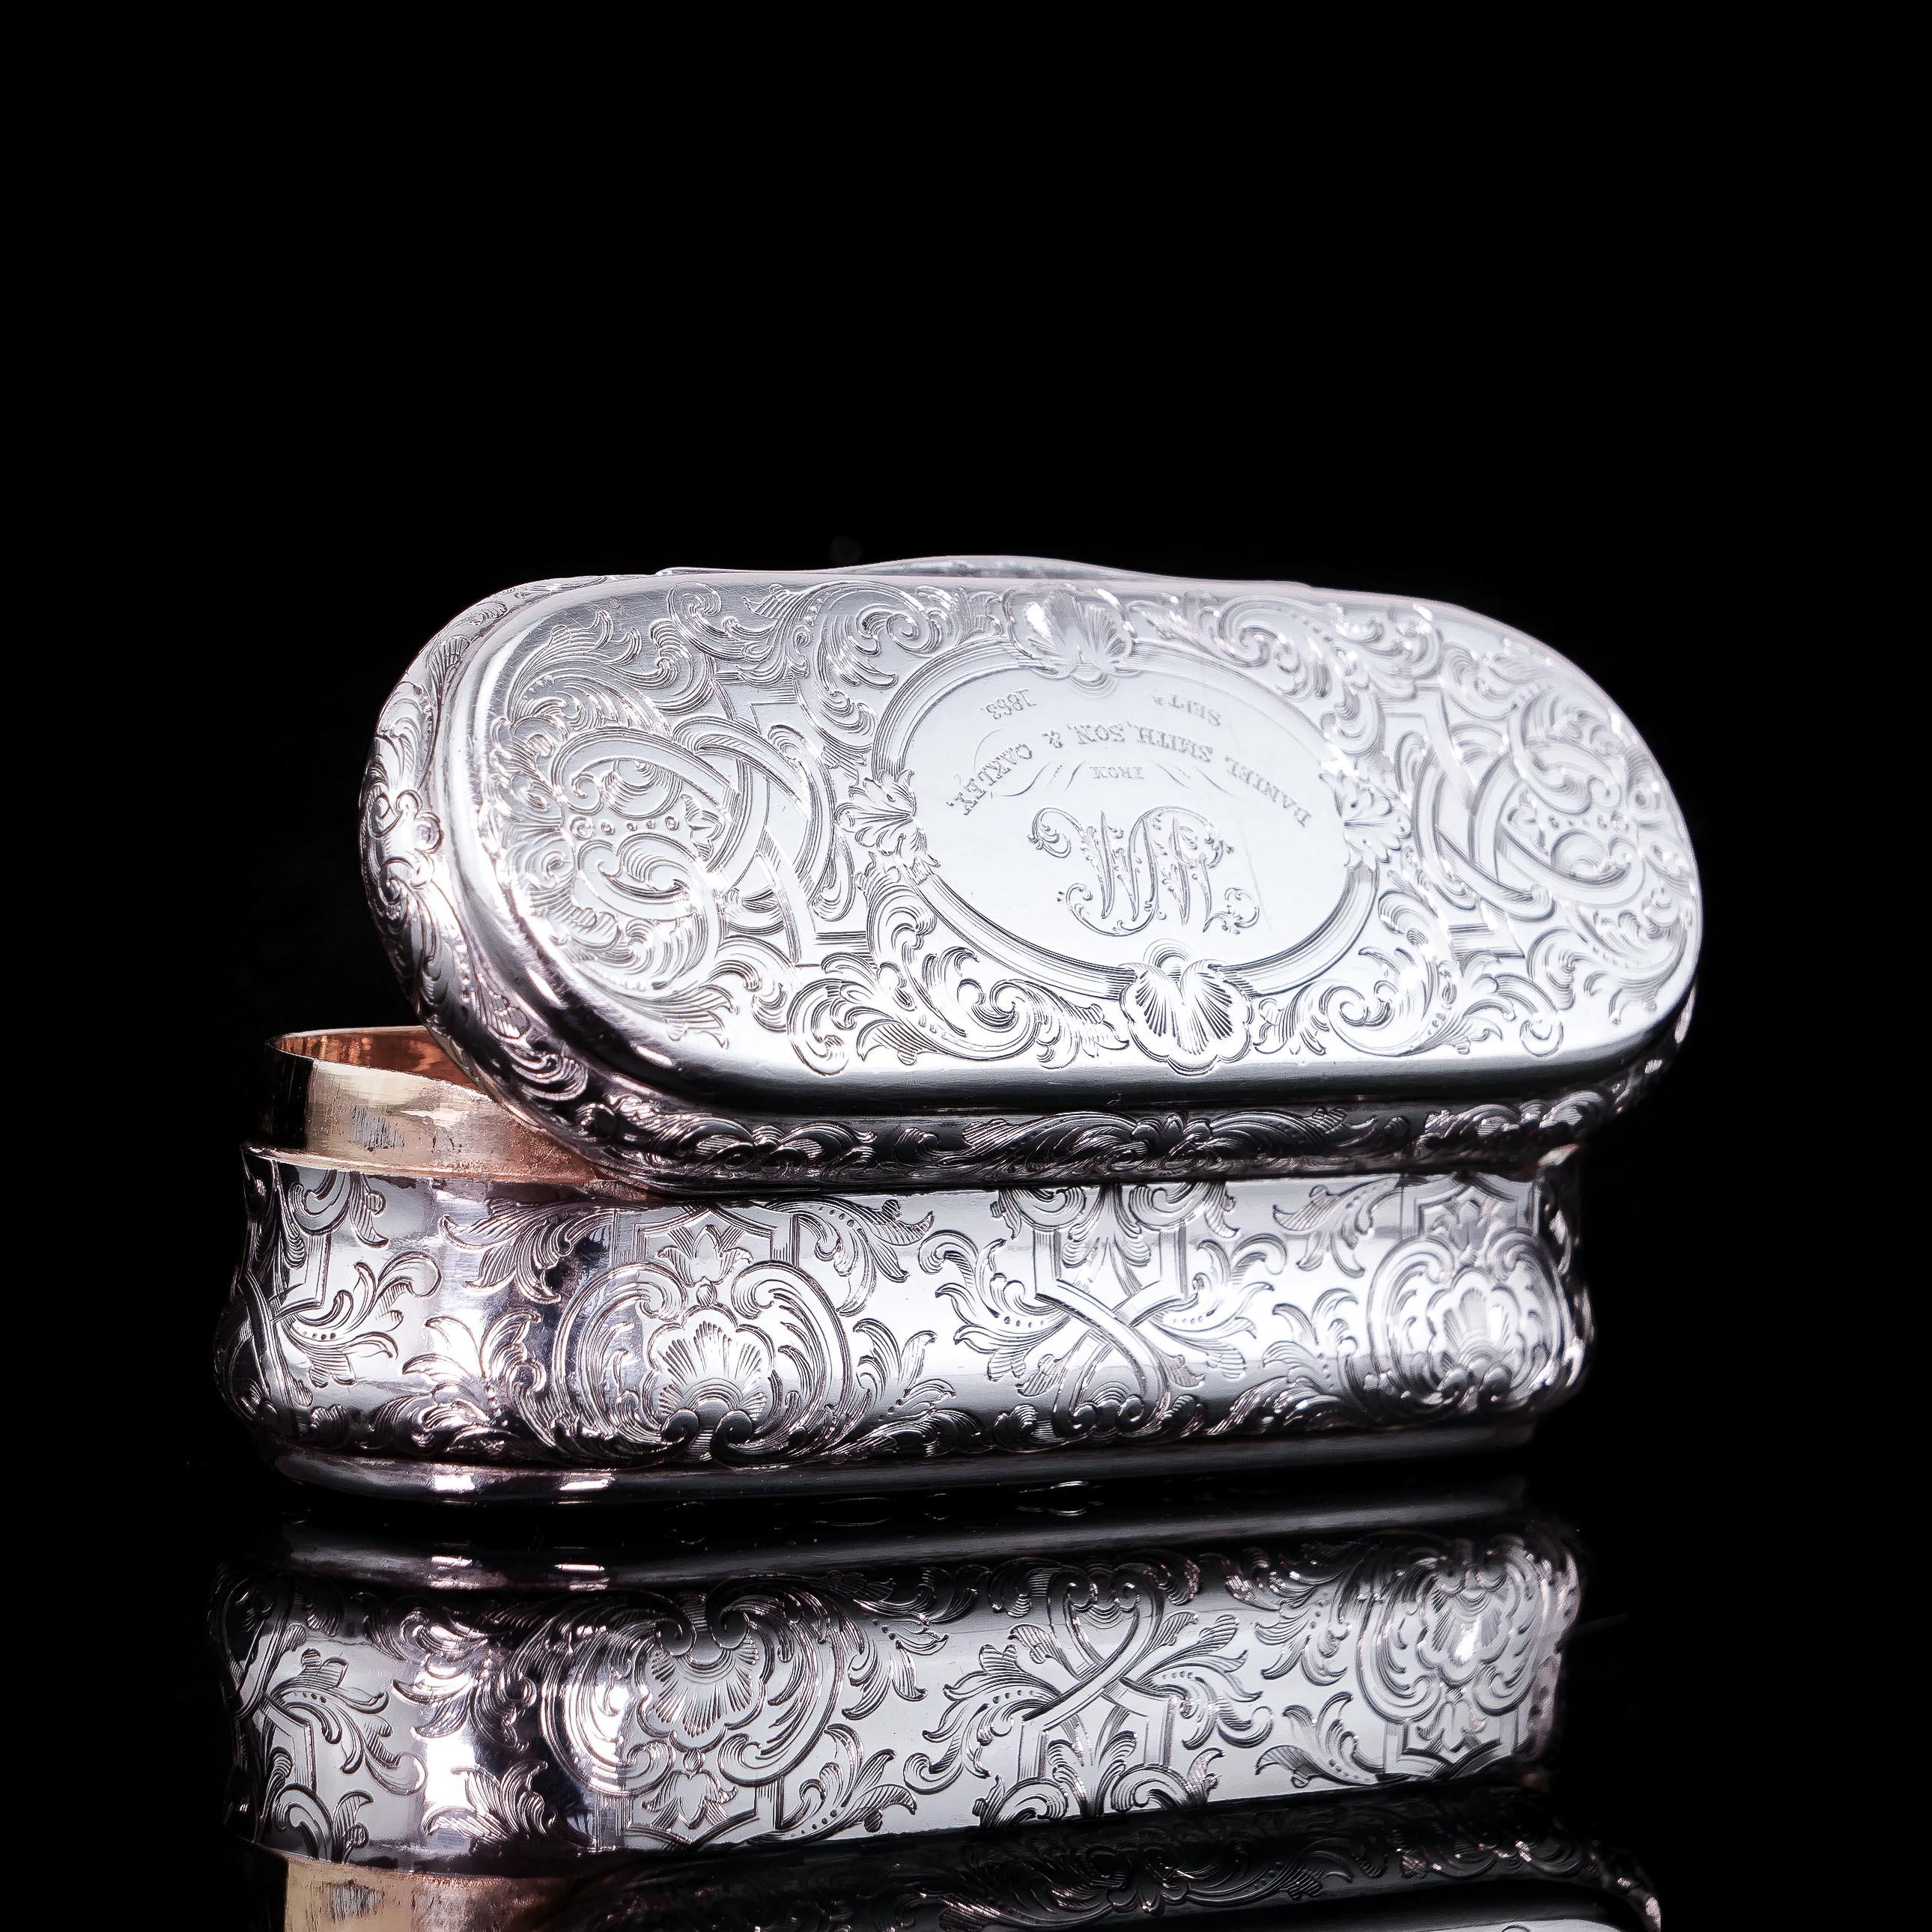 Antique Silver Snuff Box Oblong Shape - Charles Rawlings & William Summers 1849 For Sale 5